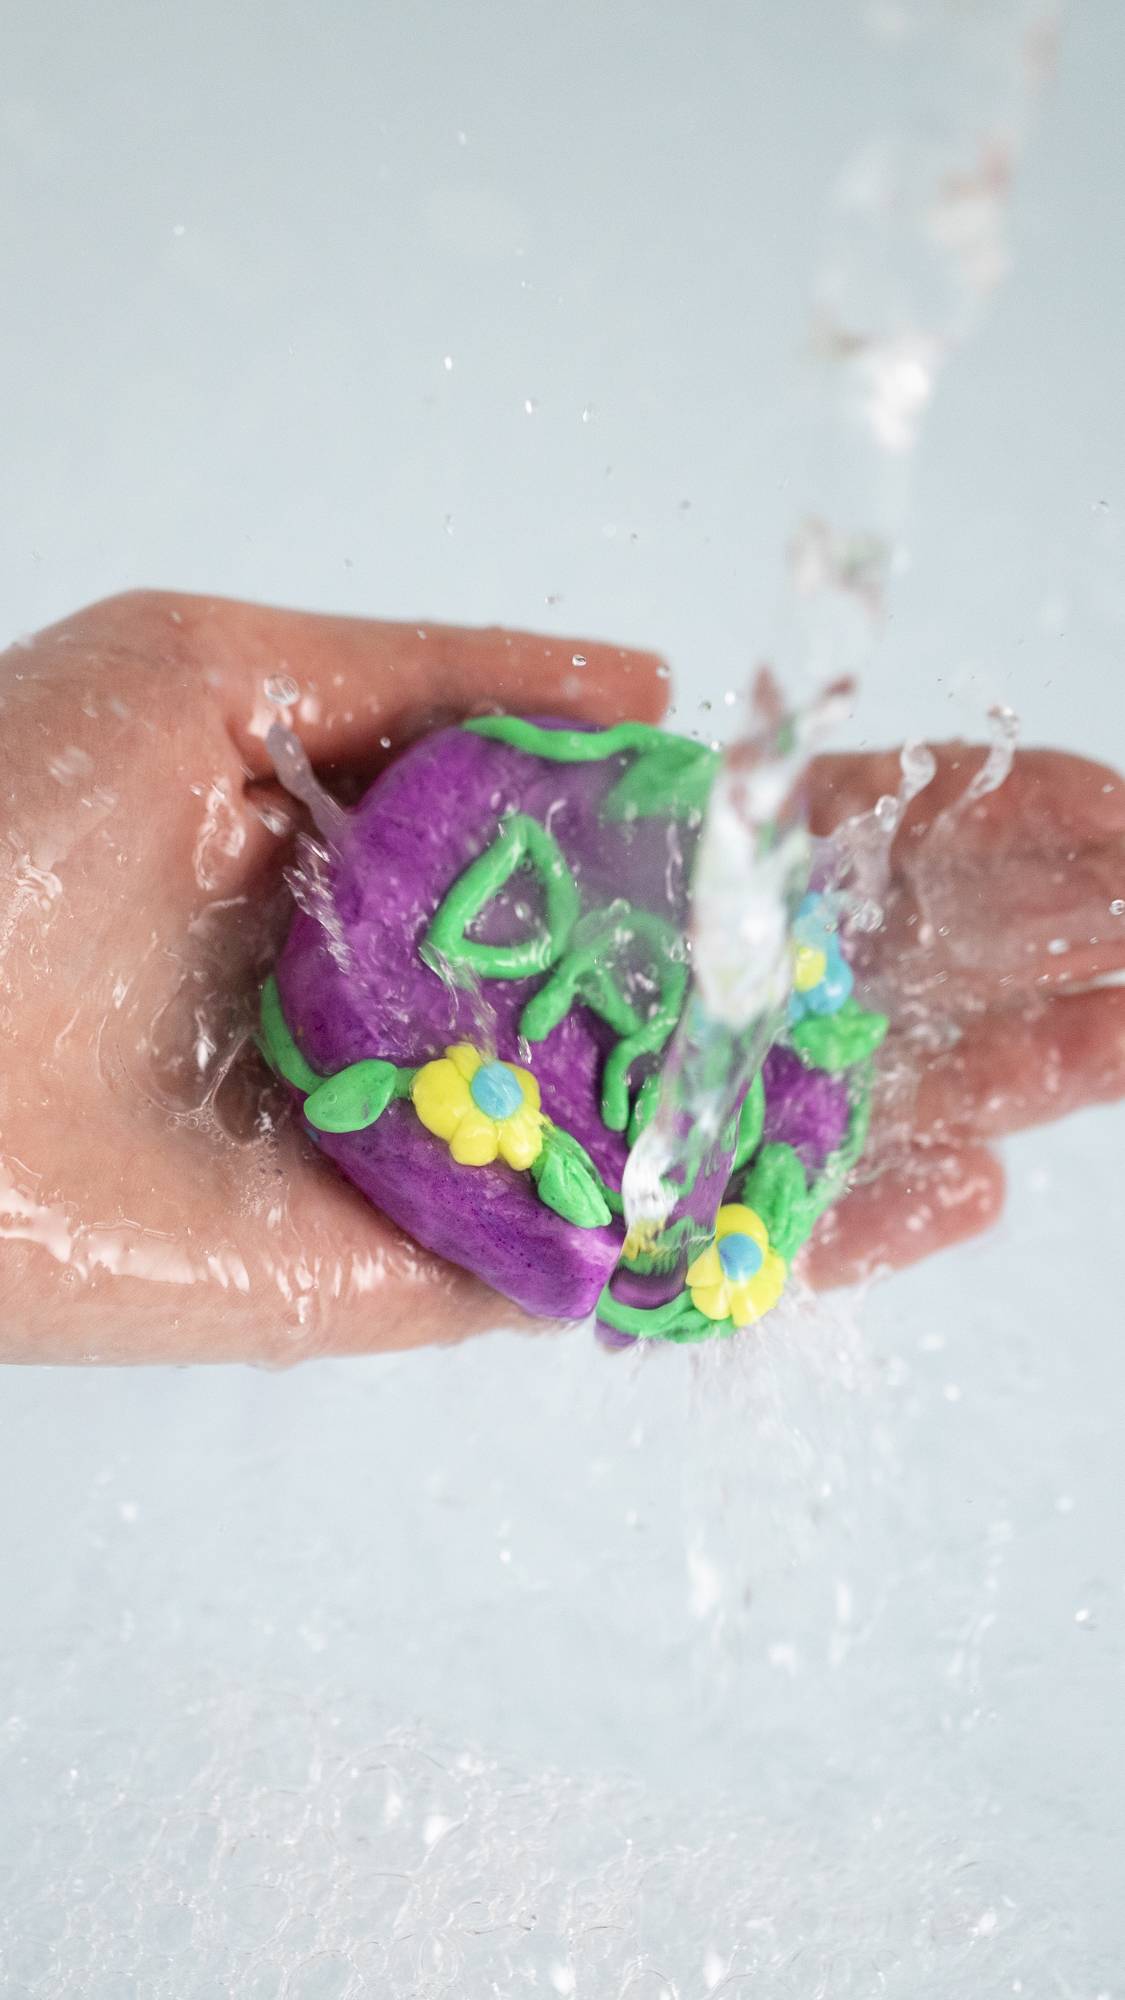 The model is holding the fun product under running water. The product is almost pebble-shaped with flowers and leaves and the word "DAD" in green in the centre.